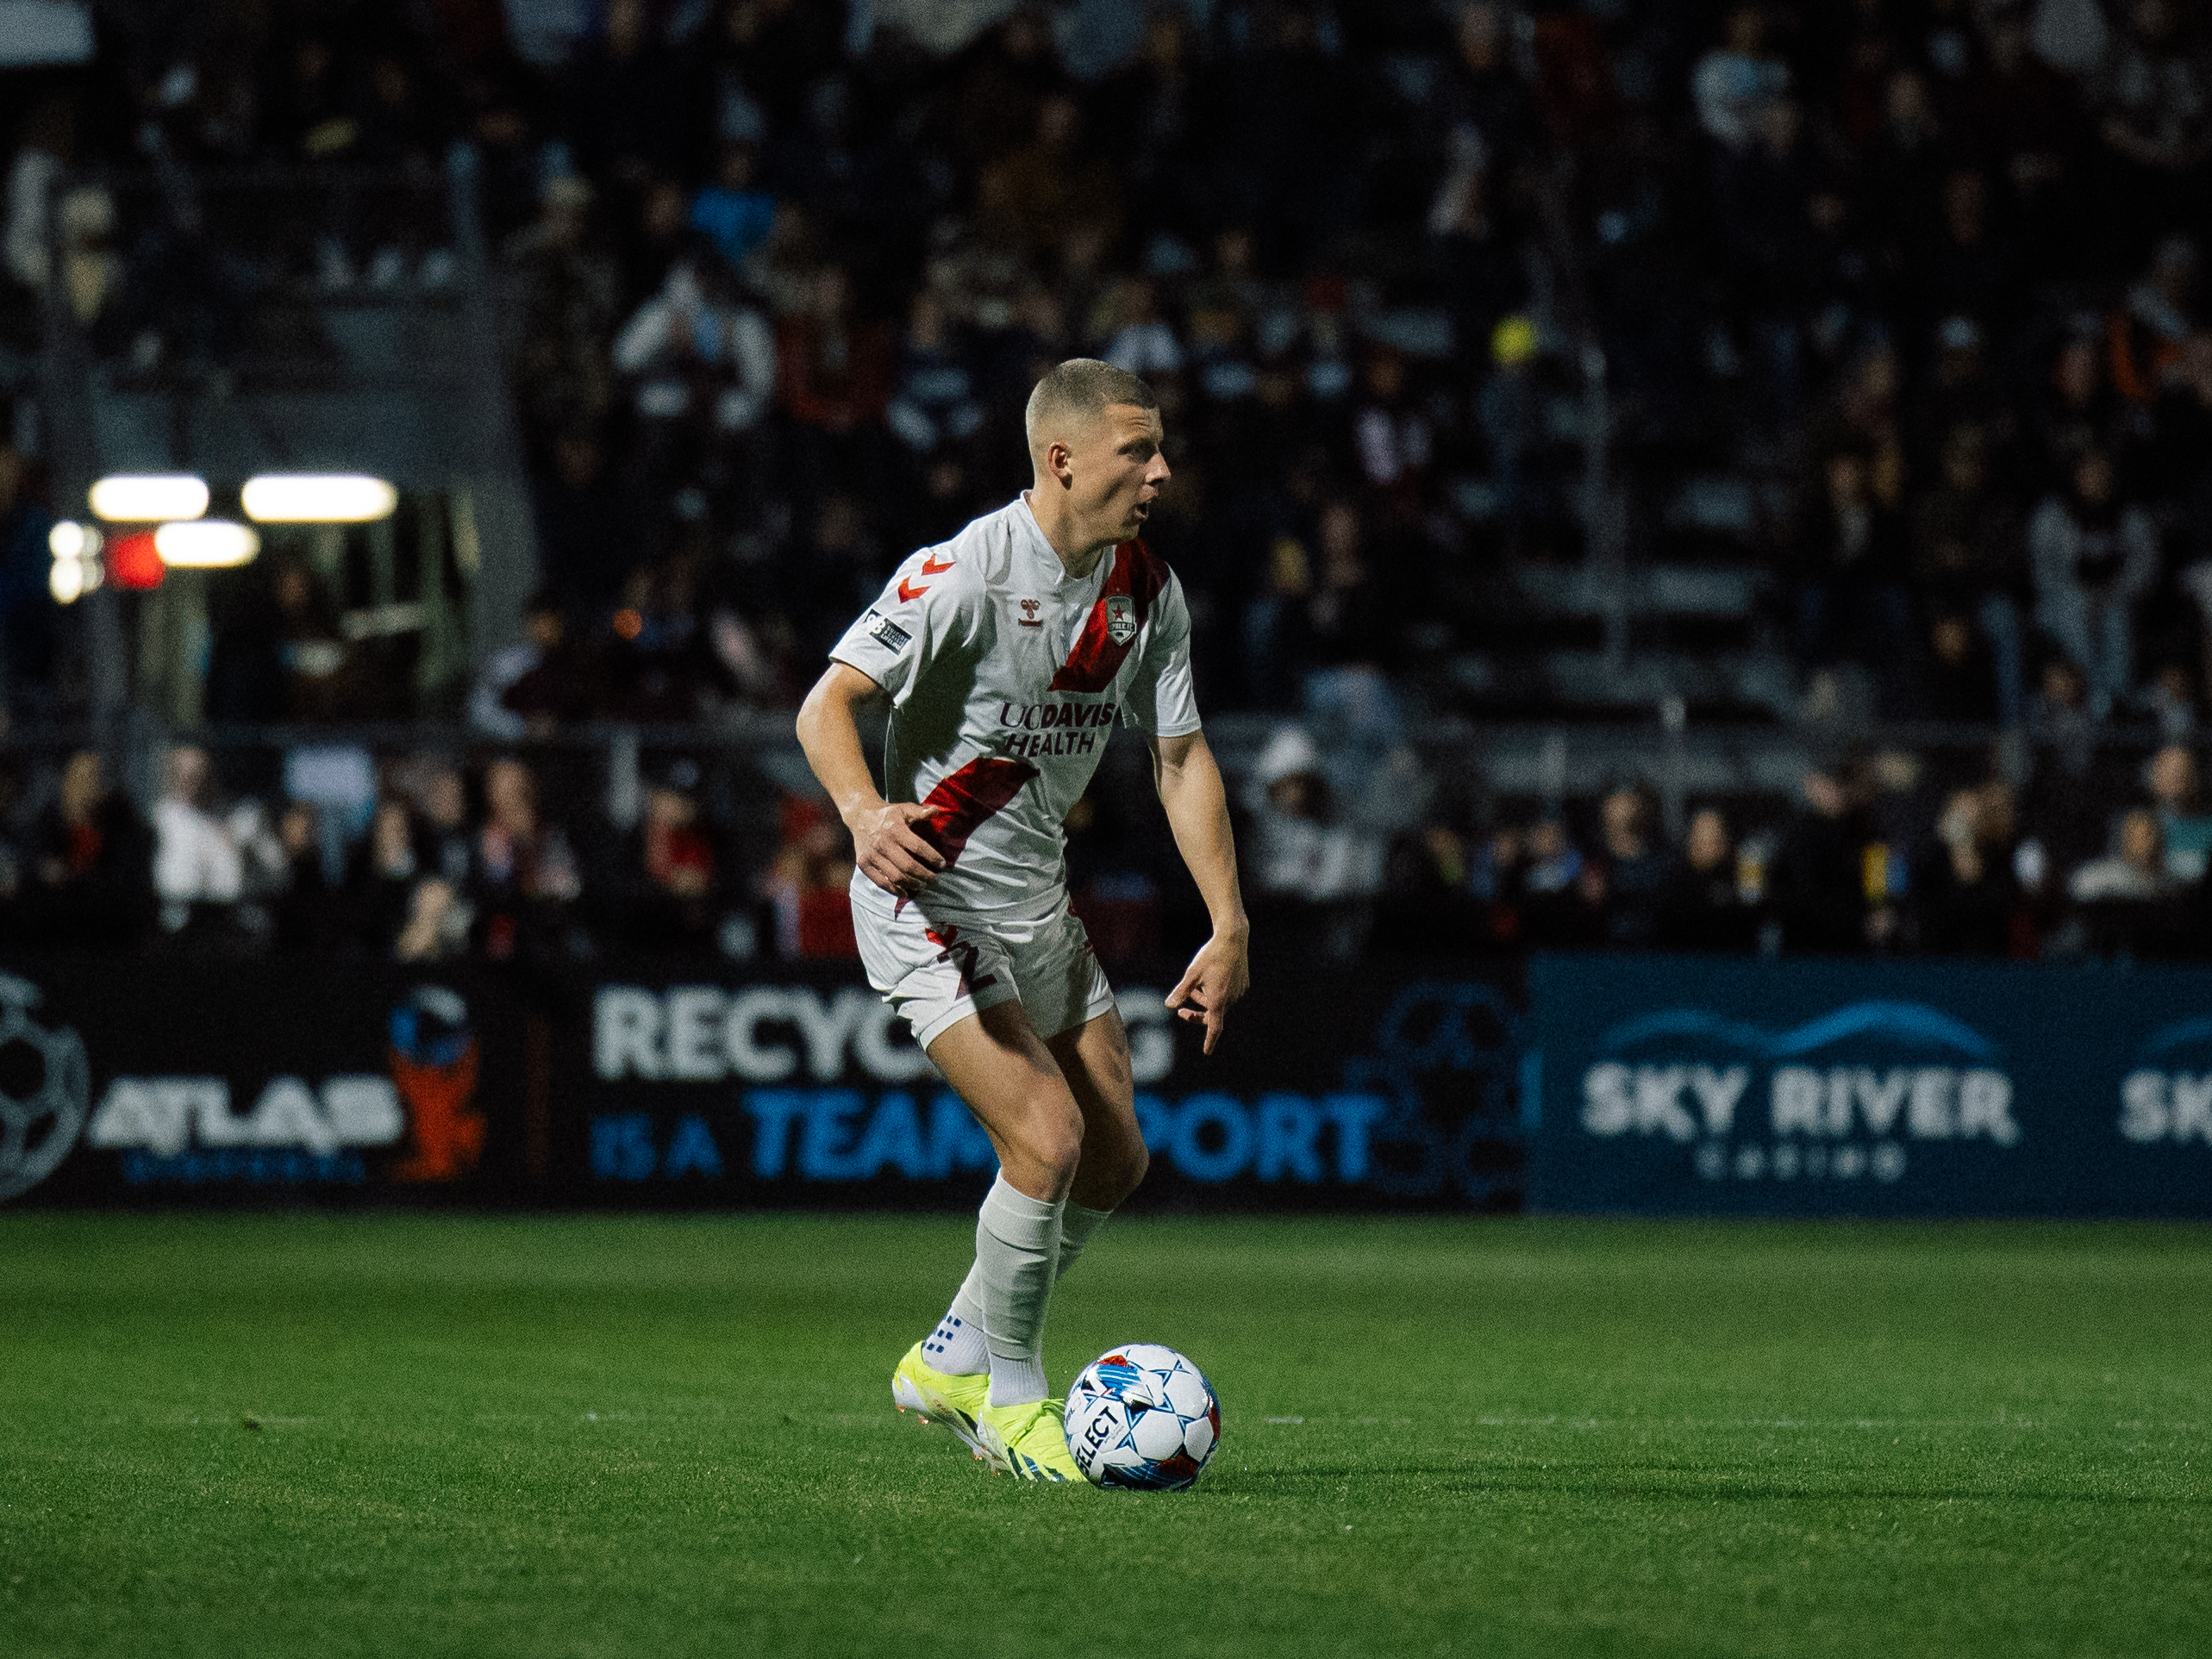 Match Preview: Republic FC at Miami FC featured image